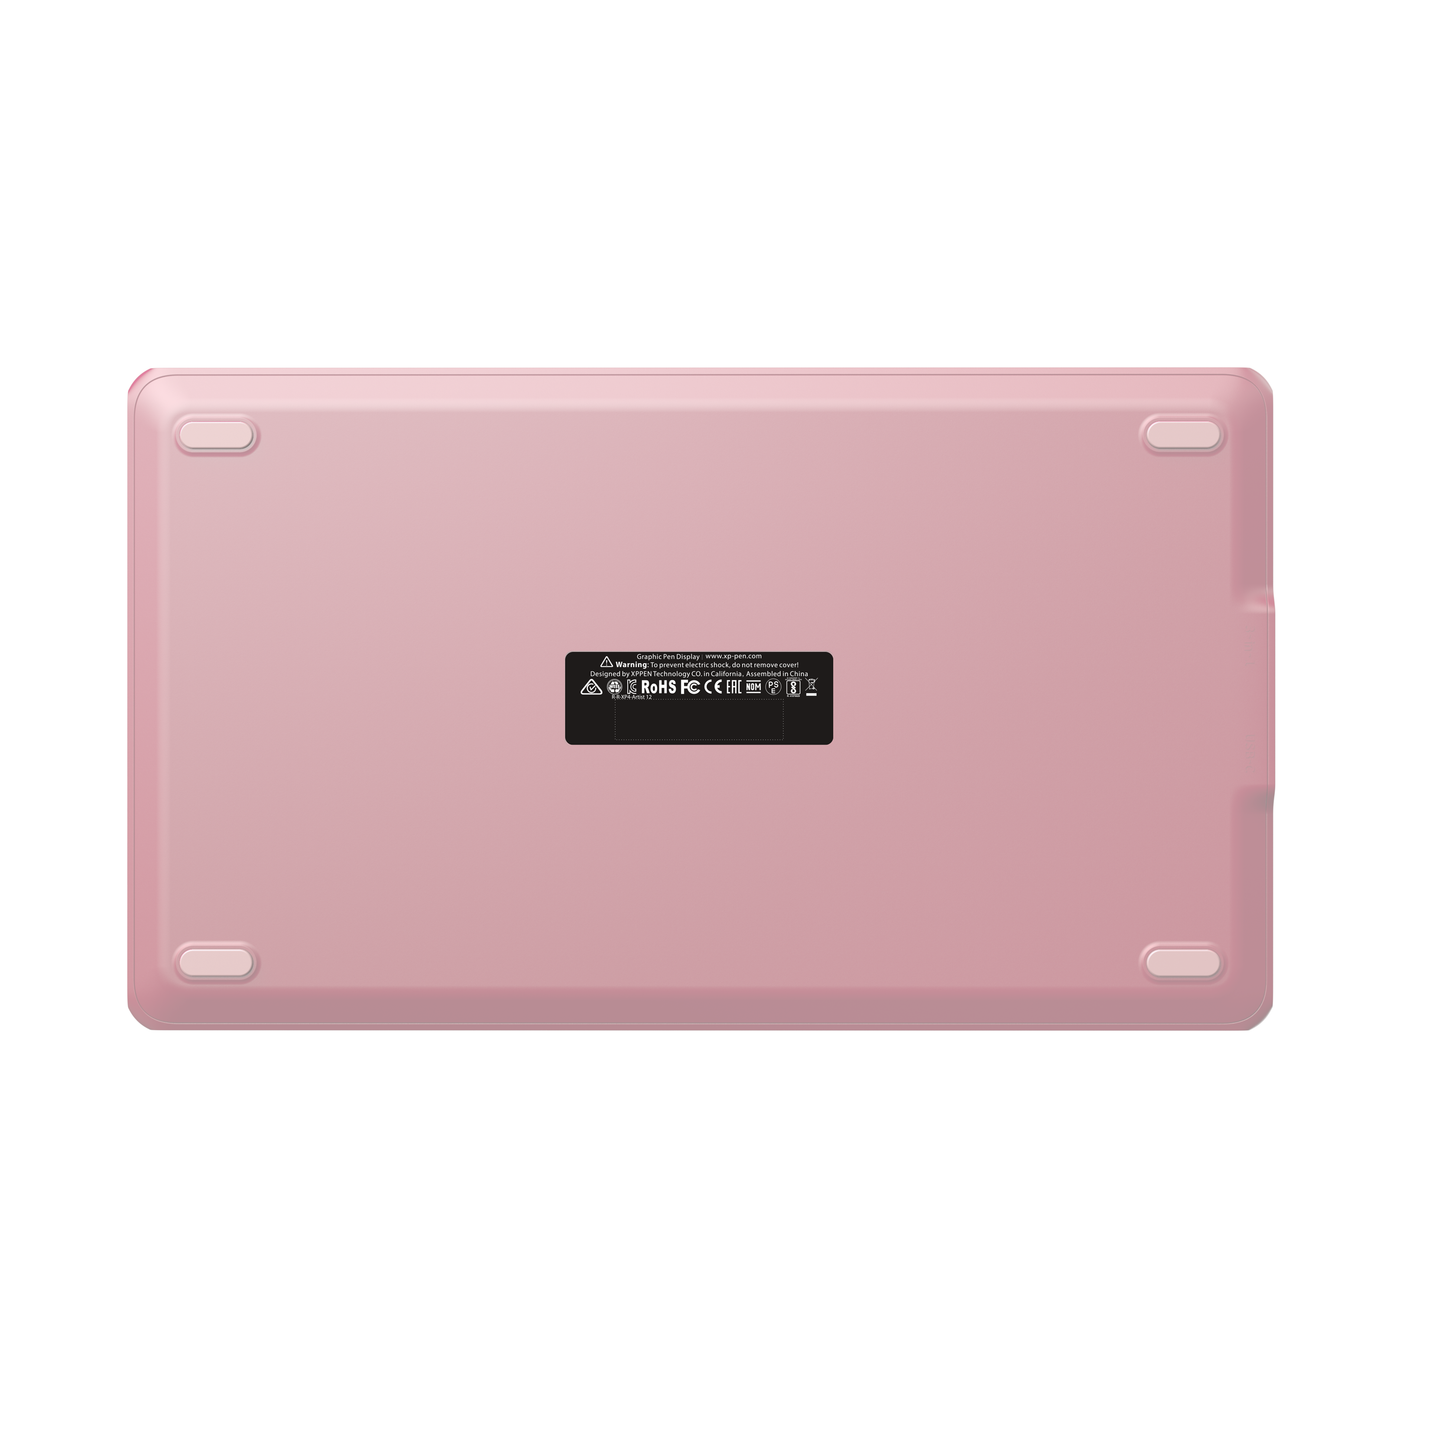 XPPen Artist 10 (2nd Gen) Pen Display Graphics Drawing Tablet Pink